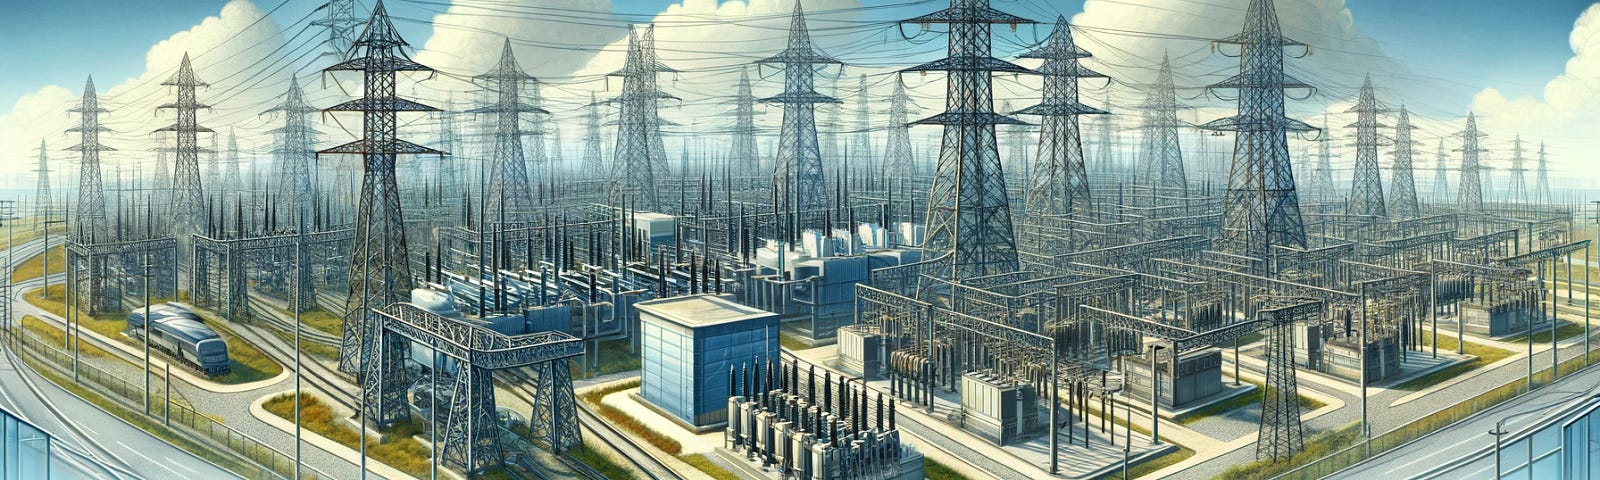 ChatGPT & DALL-E generated panoramic image illustrating the interests of institutional investors in the transmission grid.